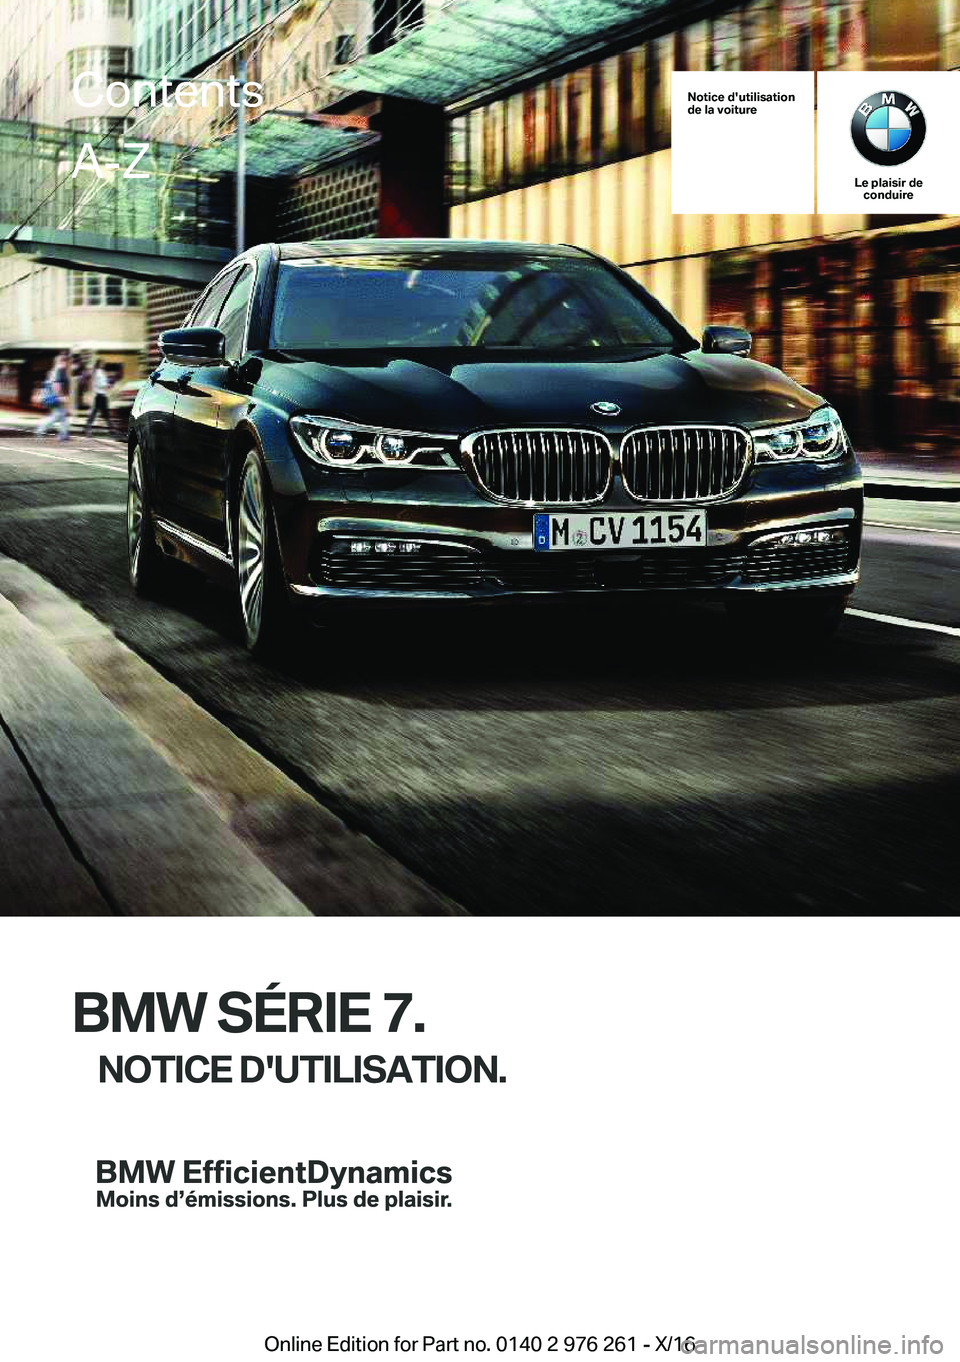 BMW 7 SERIES 2017  Notices Demploi (in French) �N�o�t�i�c�e��d�'�u�t�i�l�i�s�a�t�i�o�n
�d�e��l�a��v�o�i�t�u�r�e
�L�e��p�l�a�i�s�i�r��d�e �c�o�n�d�u�i�r�e
�B�M�W��S�